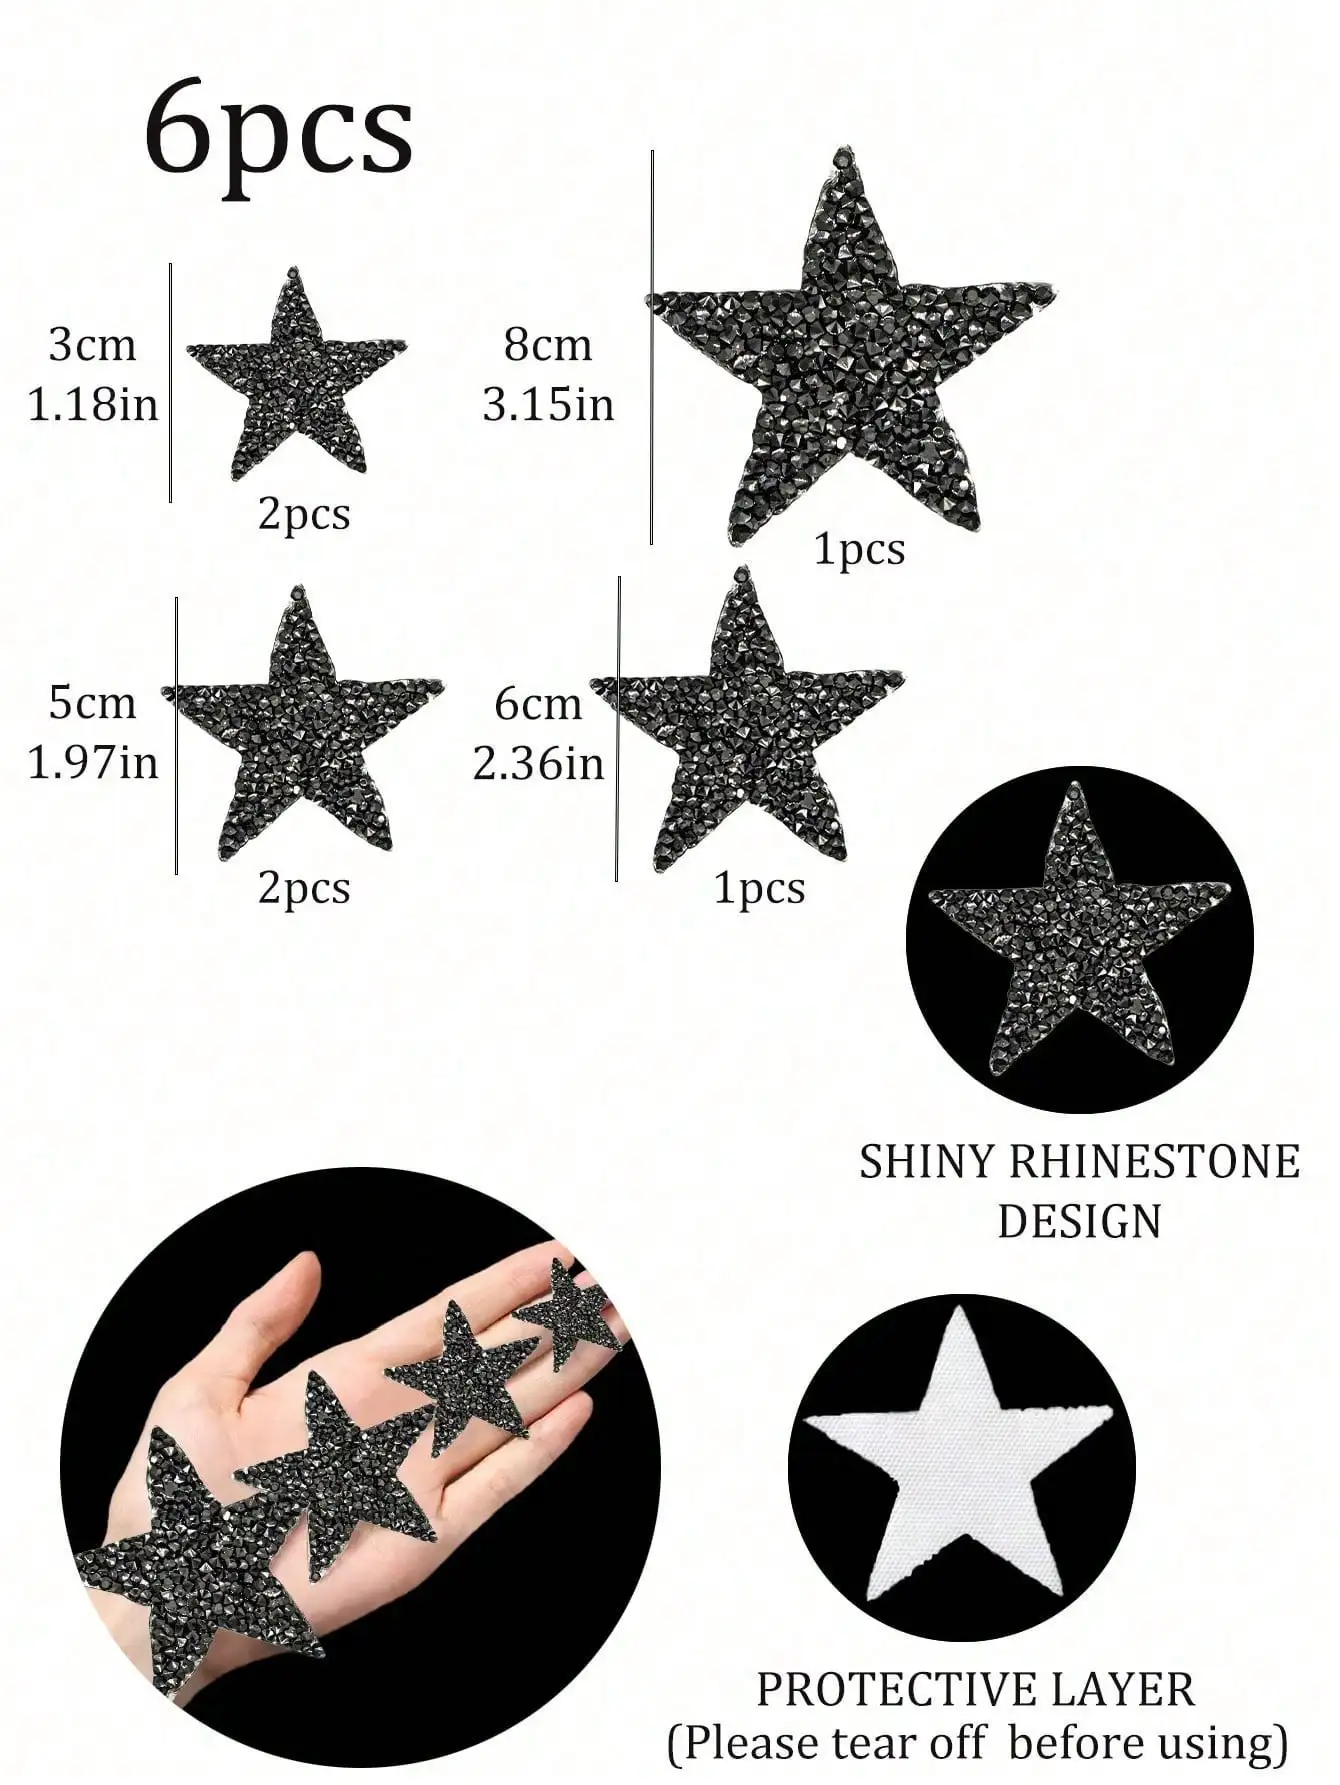 6pcs- Ironed Star Patch Multi-size Sticky Star Patch Resin Rhinestone Star Decal DIY for clothing jeans restoration decoration